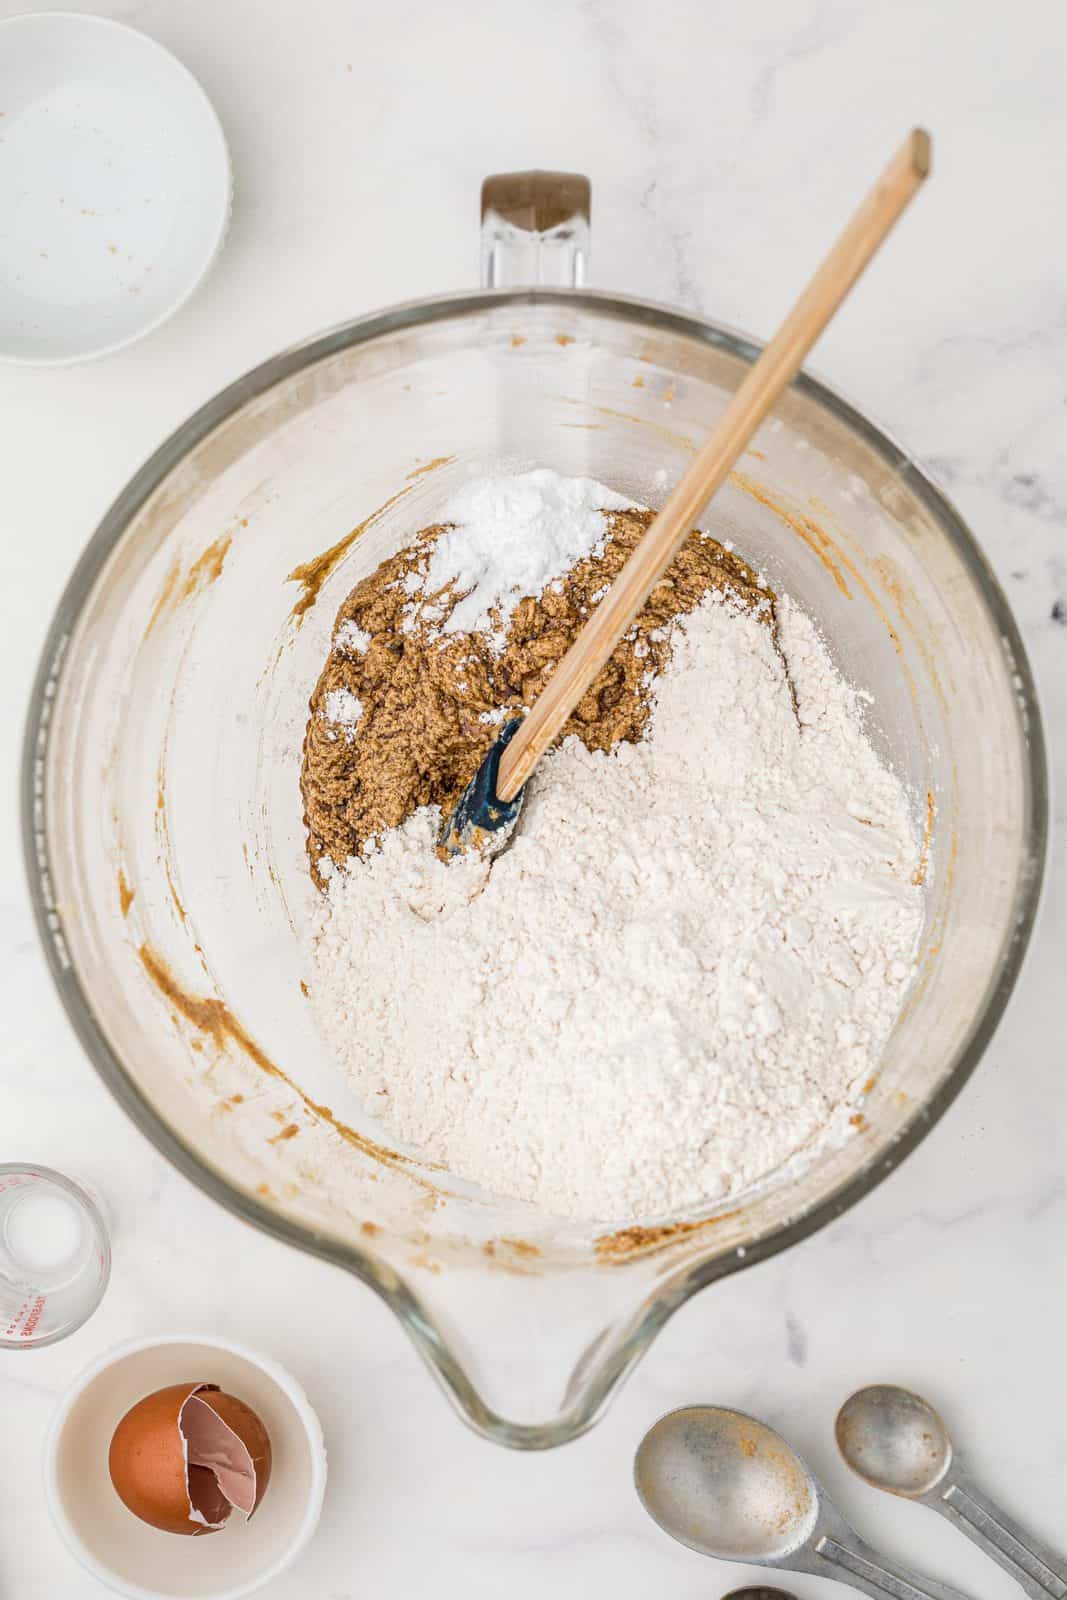 Flour added to bowl of stand mixer with other ingredients.